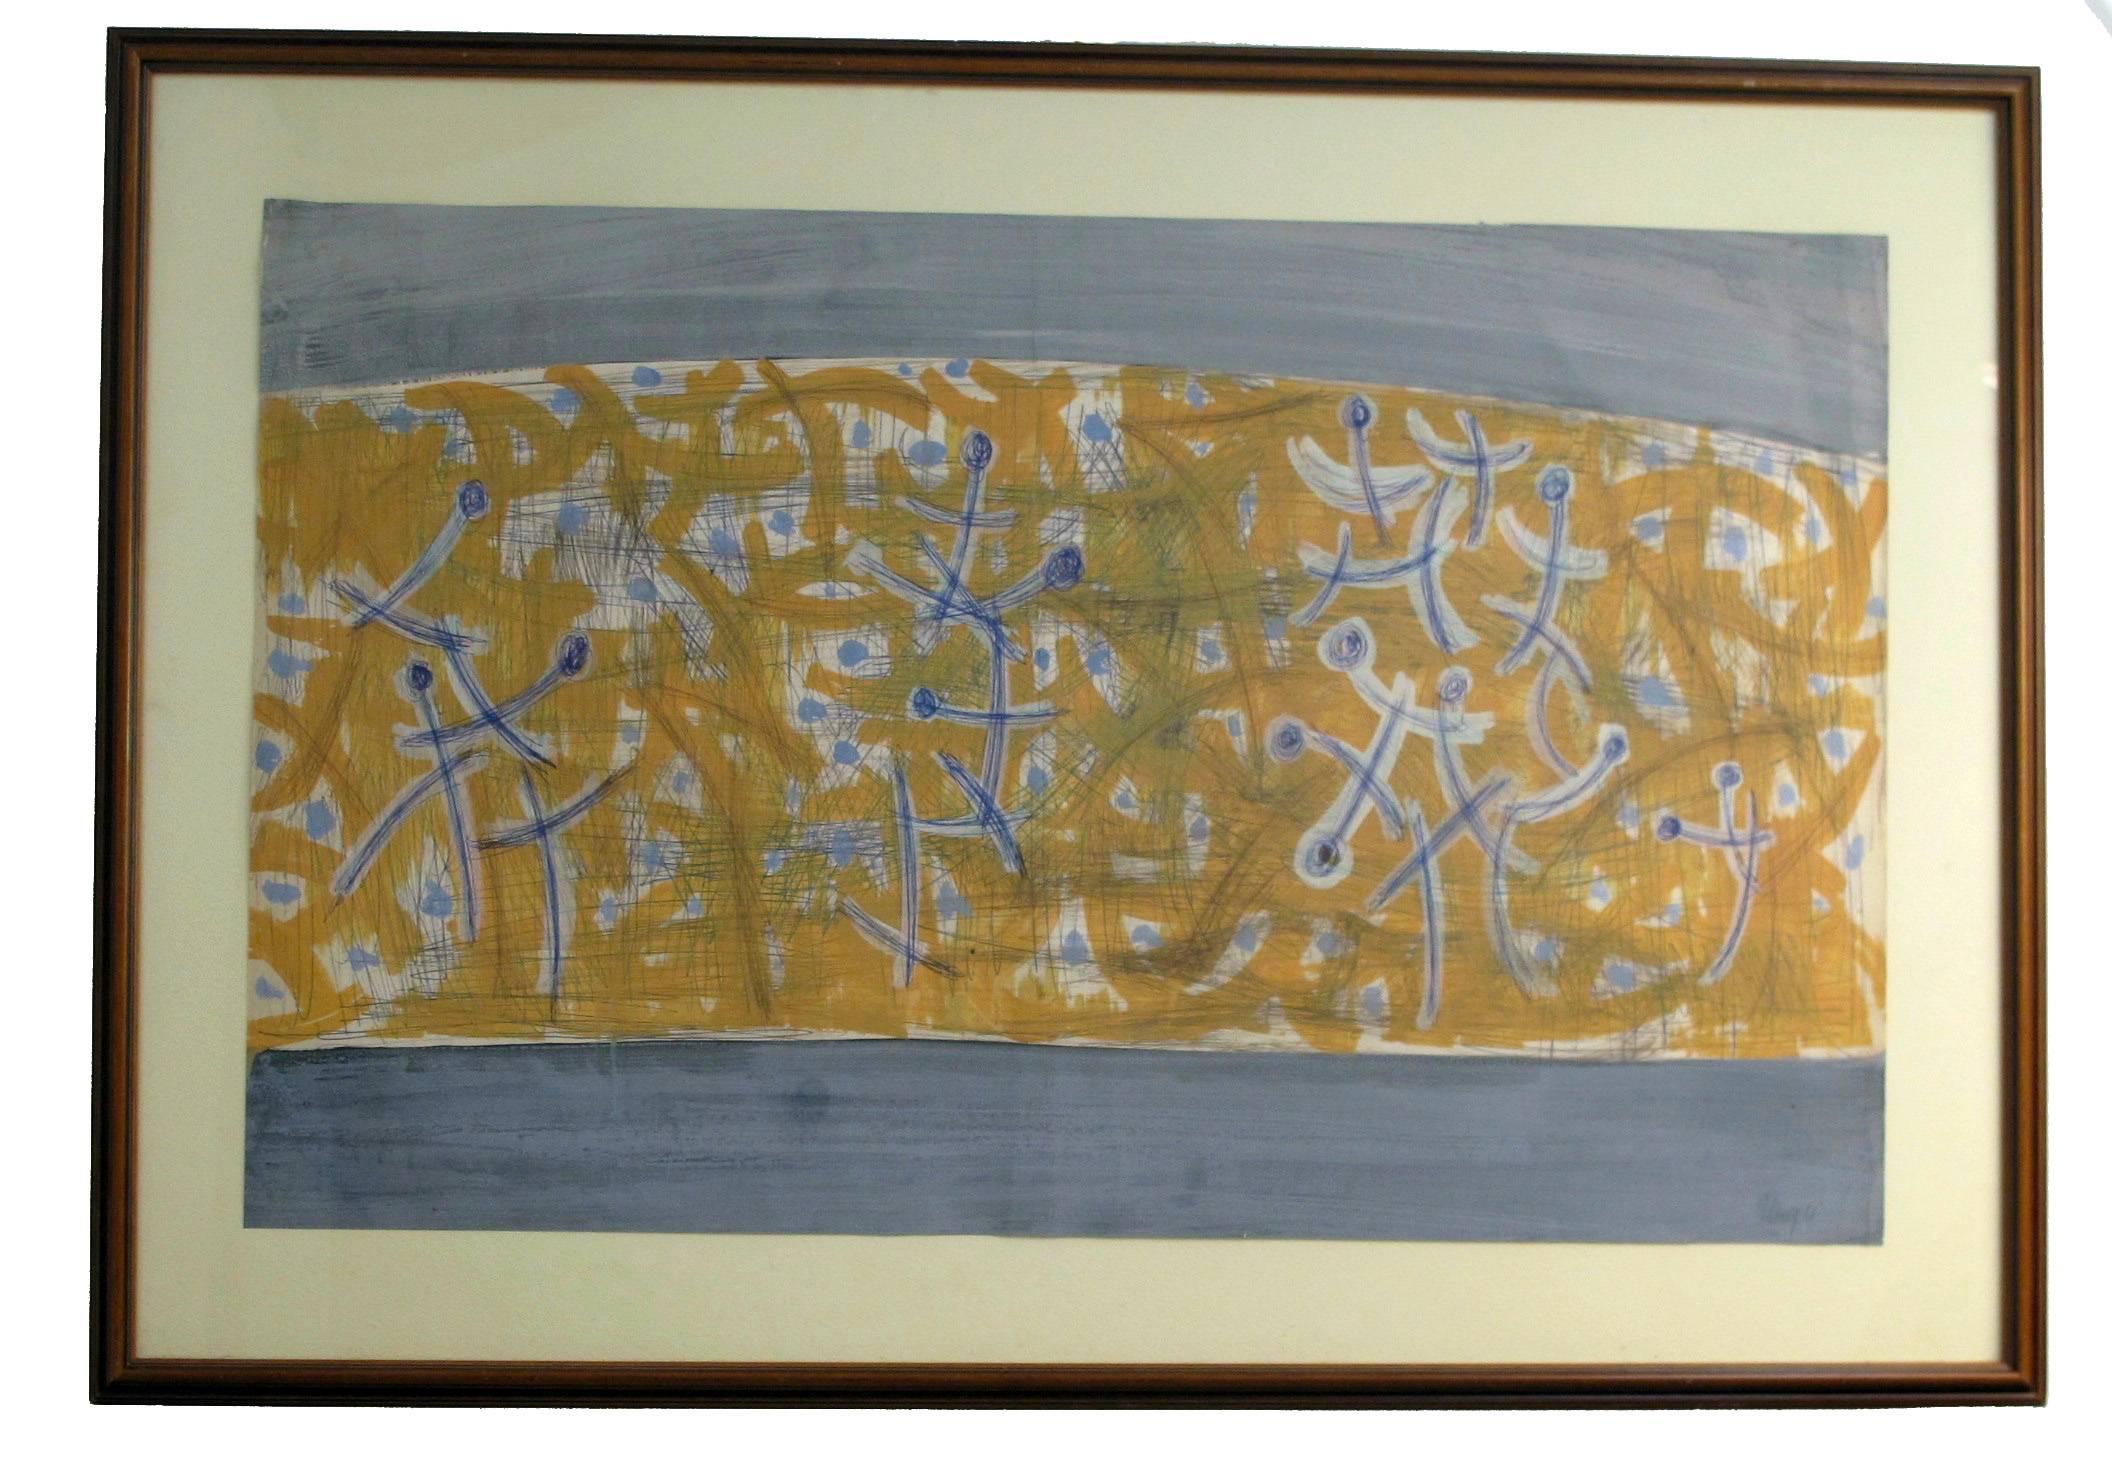 Mid-20th century abstract painting by San Francisco Bay Area artist Robert Gilberg (b.1911-d.1970). Ink and gouache on paper, framed behind glass. Signed and dated 1961.

Born in Oakland, CA on April 25, 1911. Gilberg studied at the Oakland Art